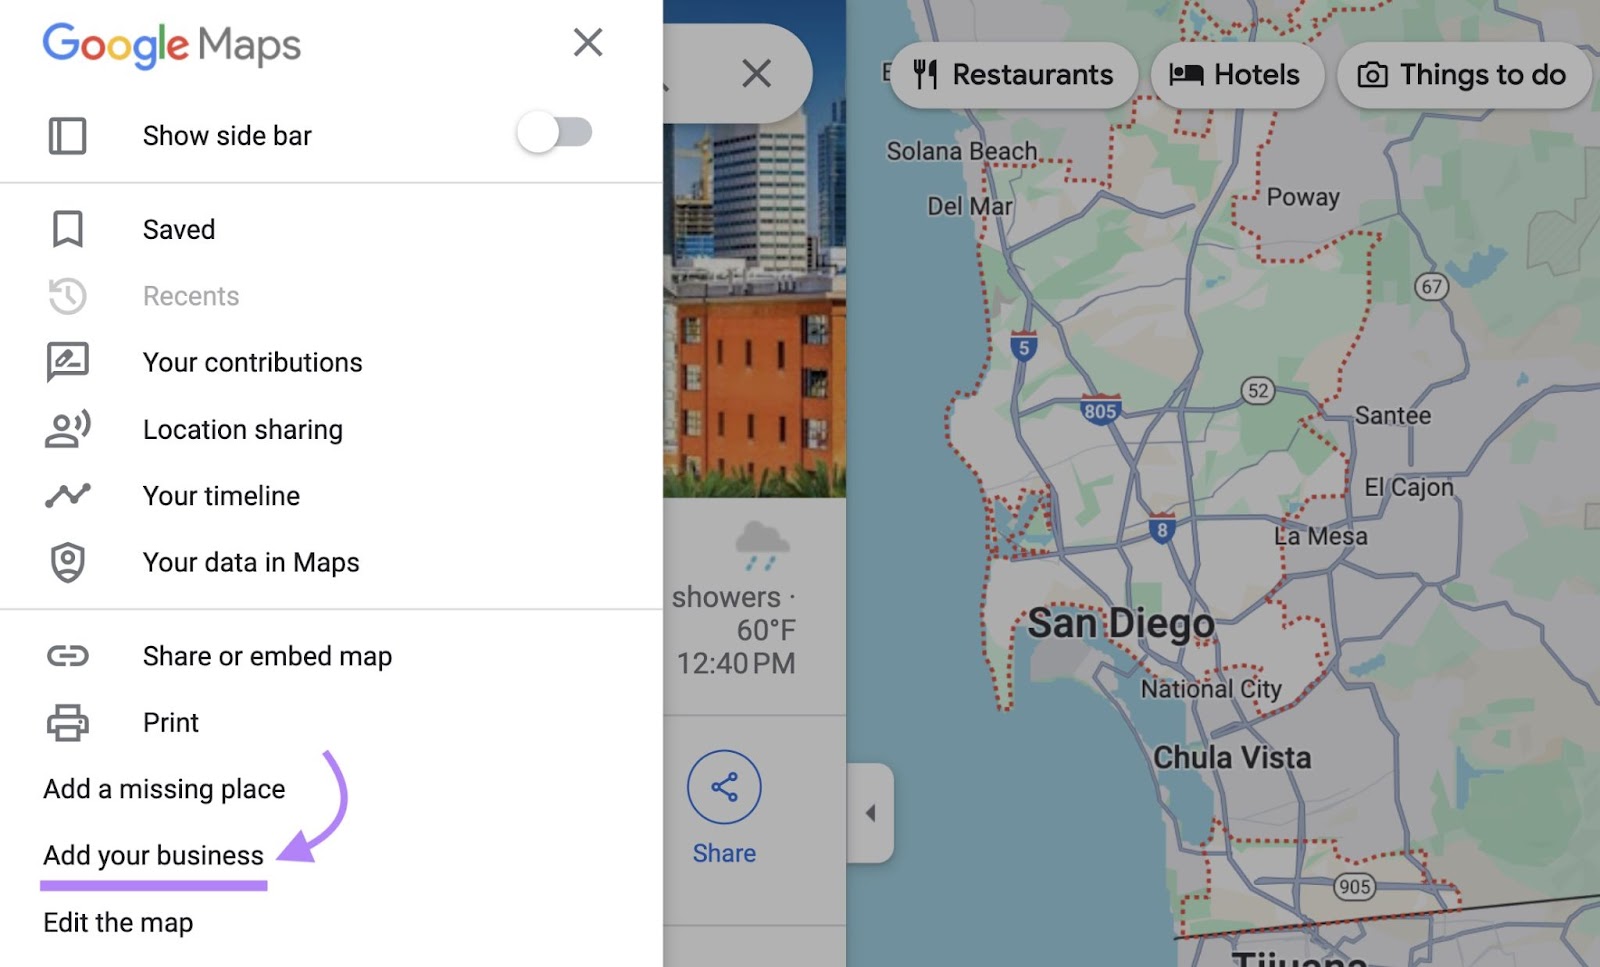 "Add your business" option highlighted in Google Maps menu